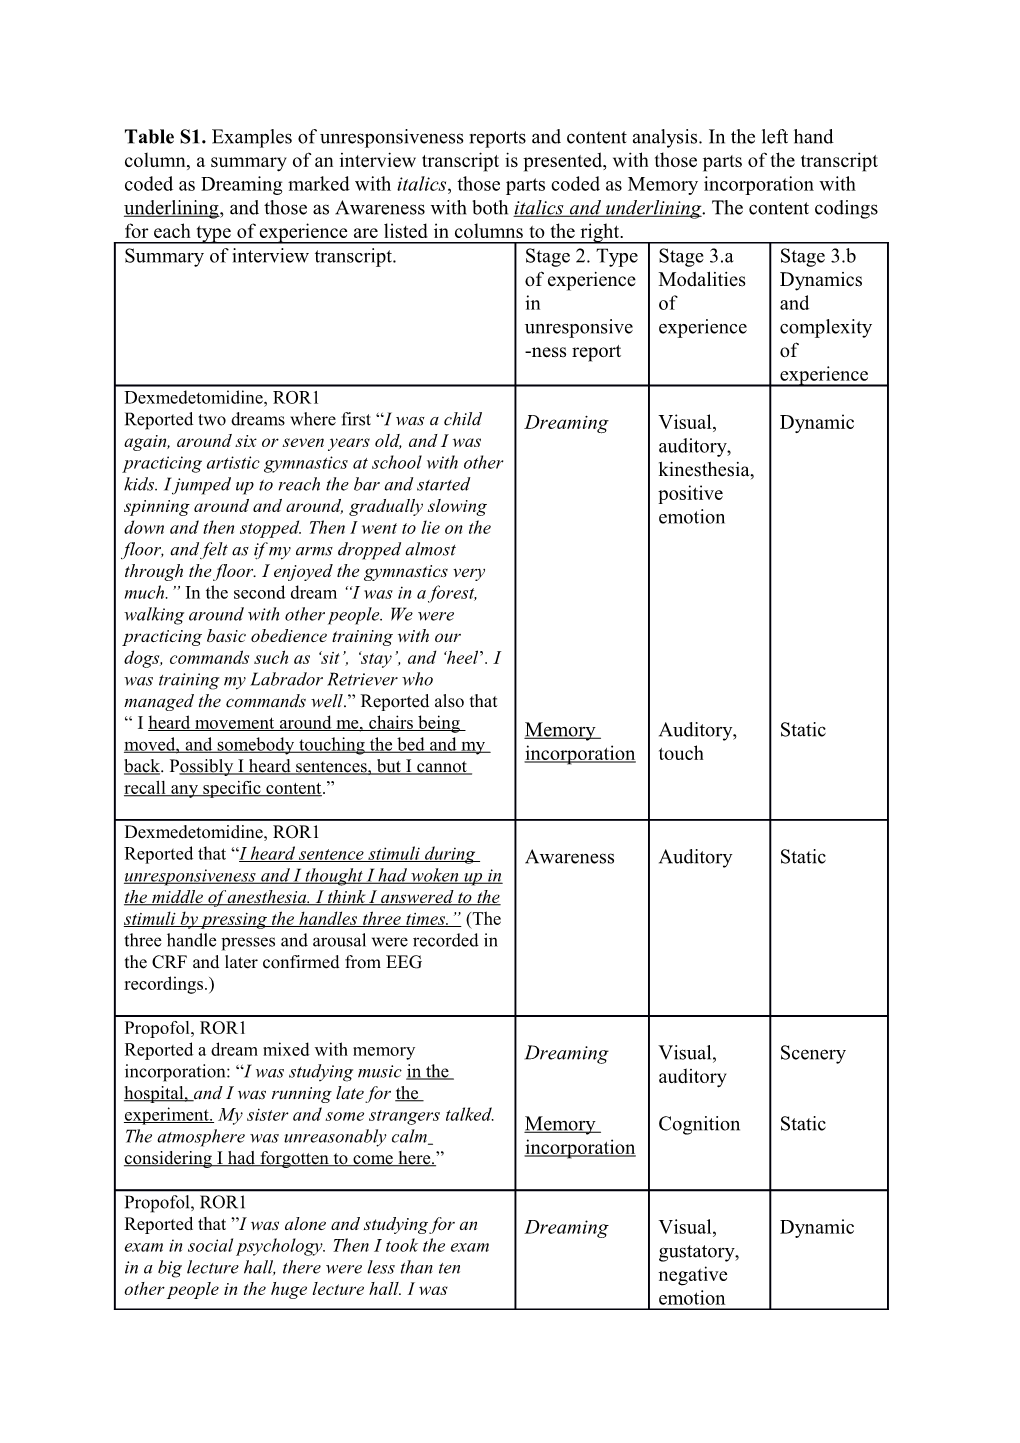 Table S1. Examples of Unresponsiveness Reports and Content Analysis. in the Left Hand Column